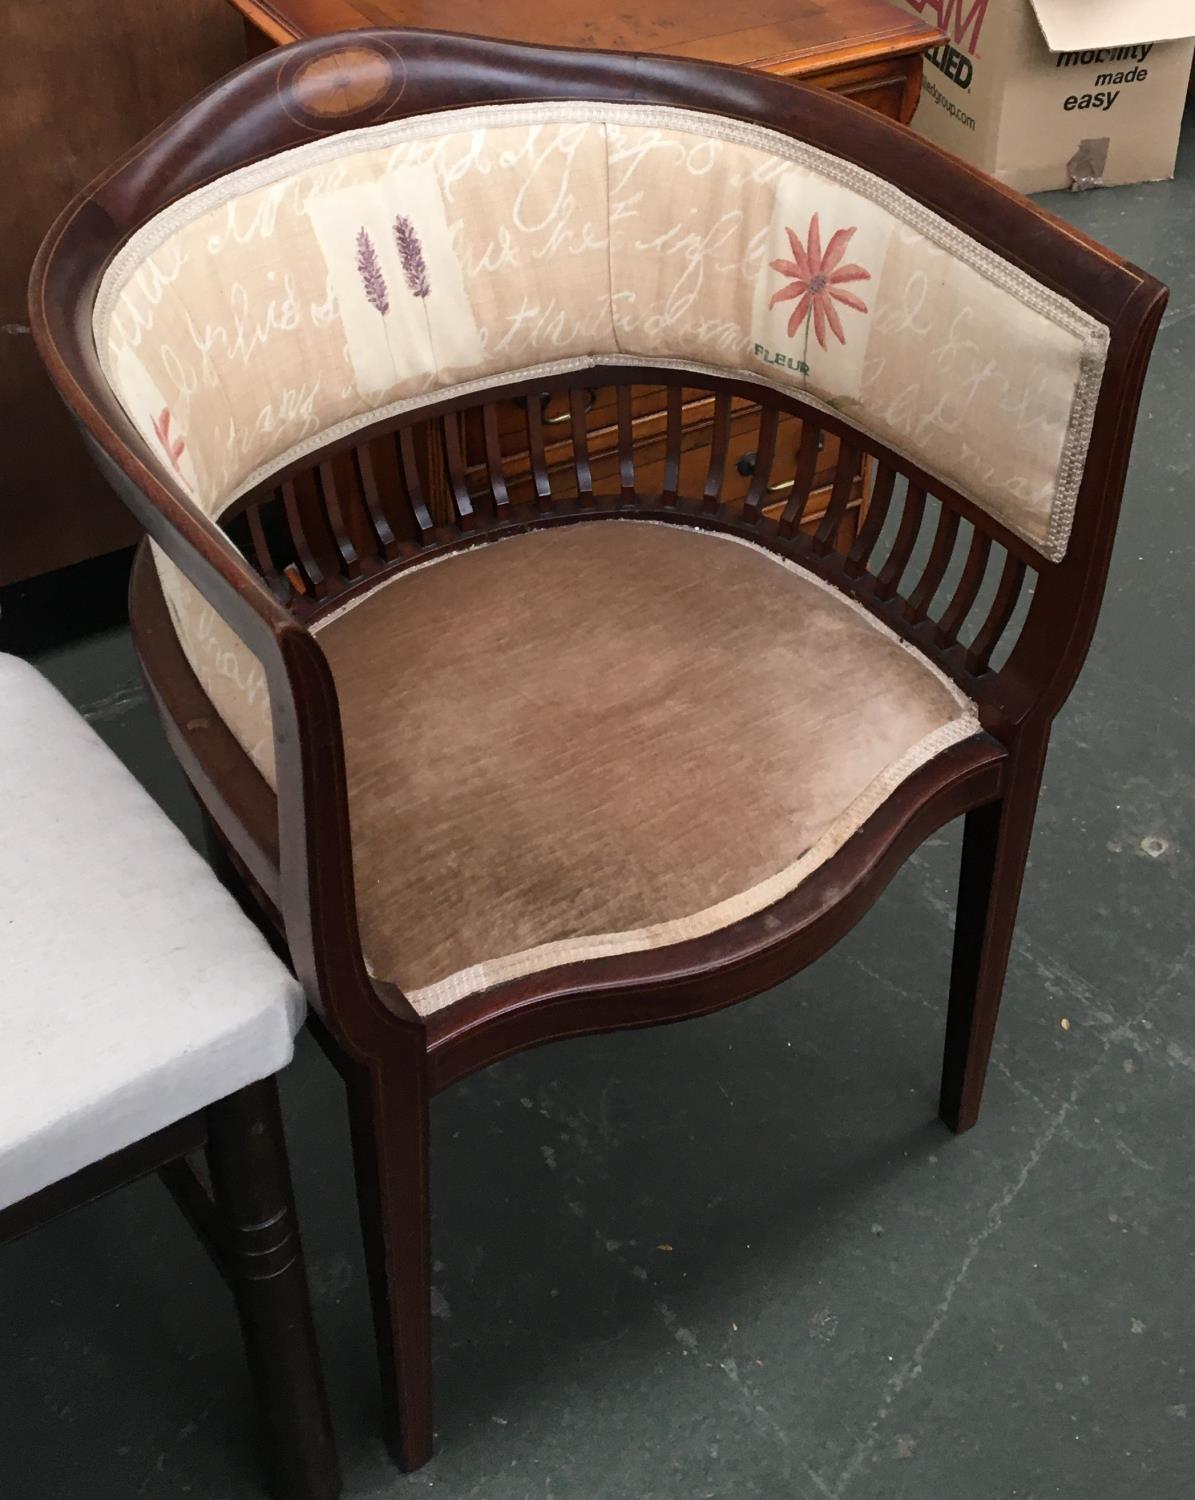 An early 20th century mahogany and marquetry captain's chair